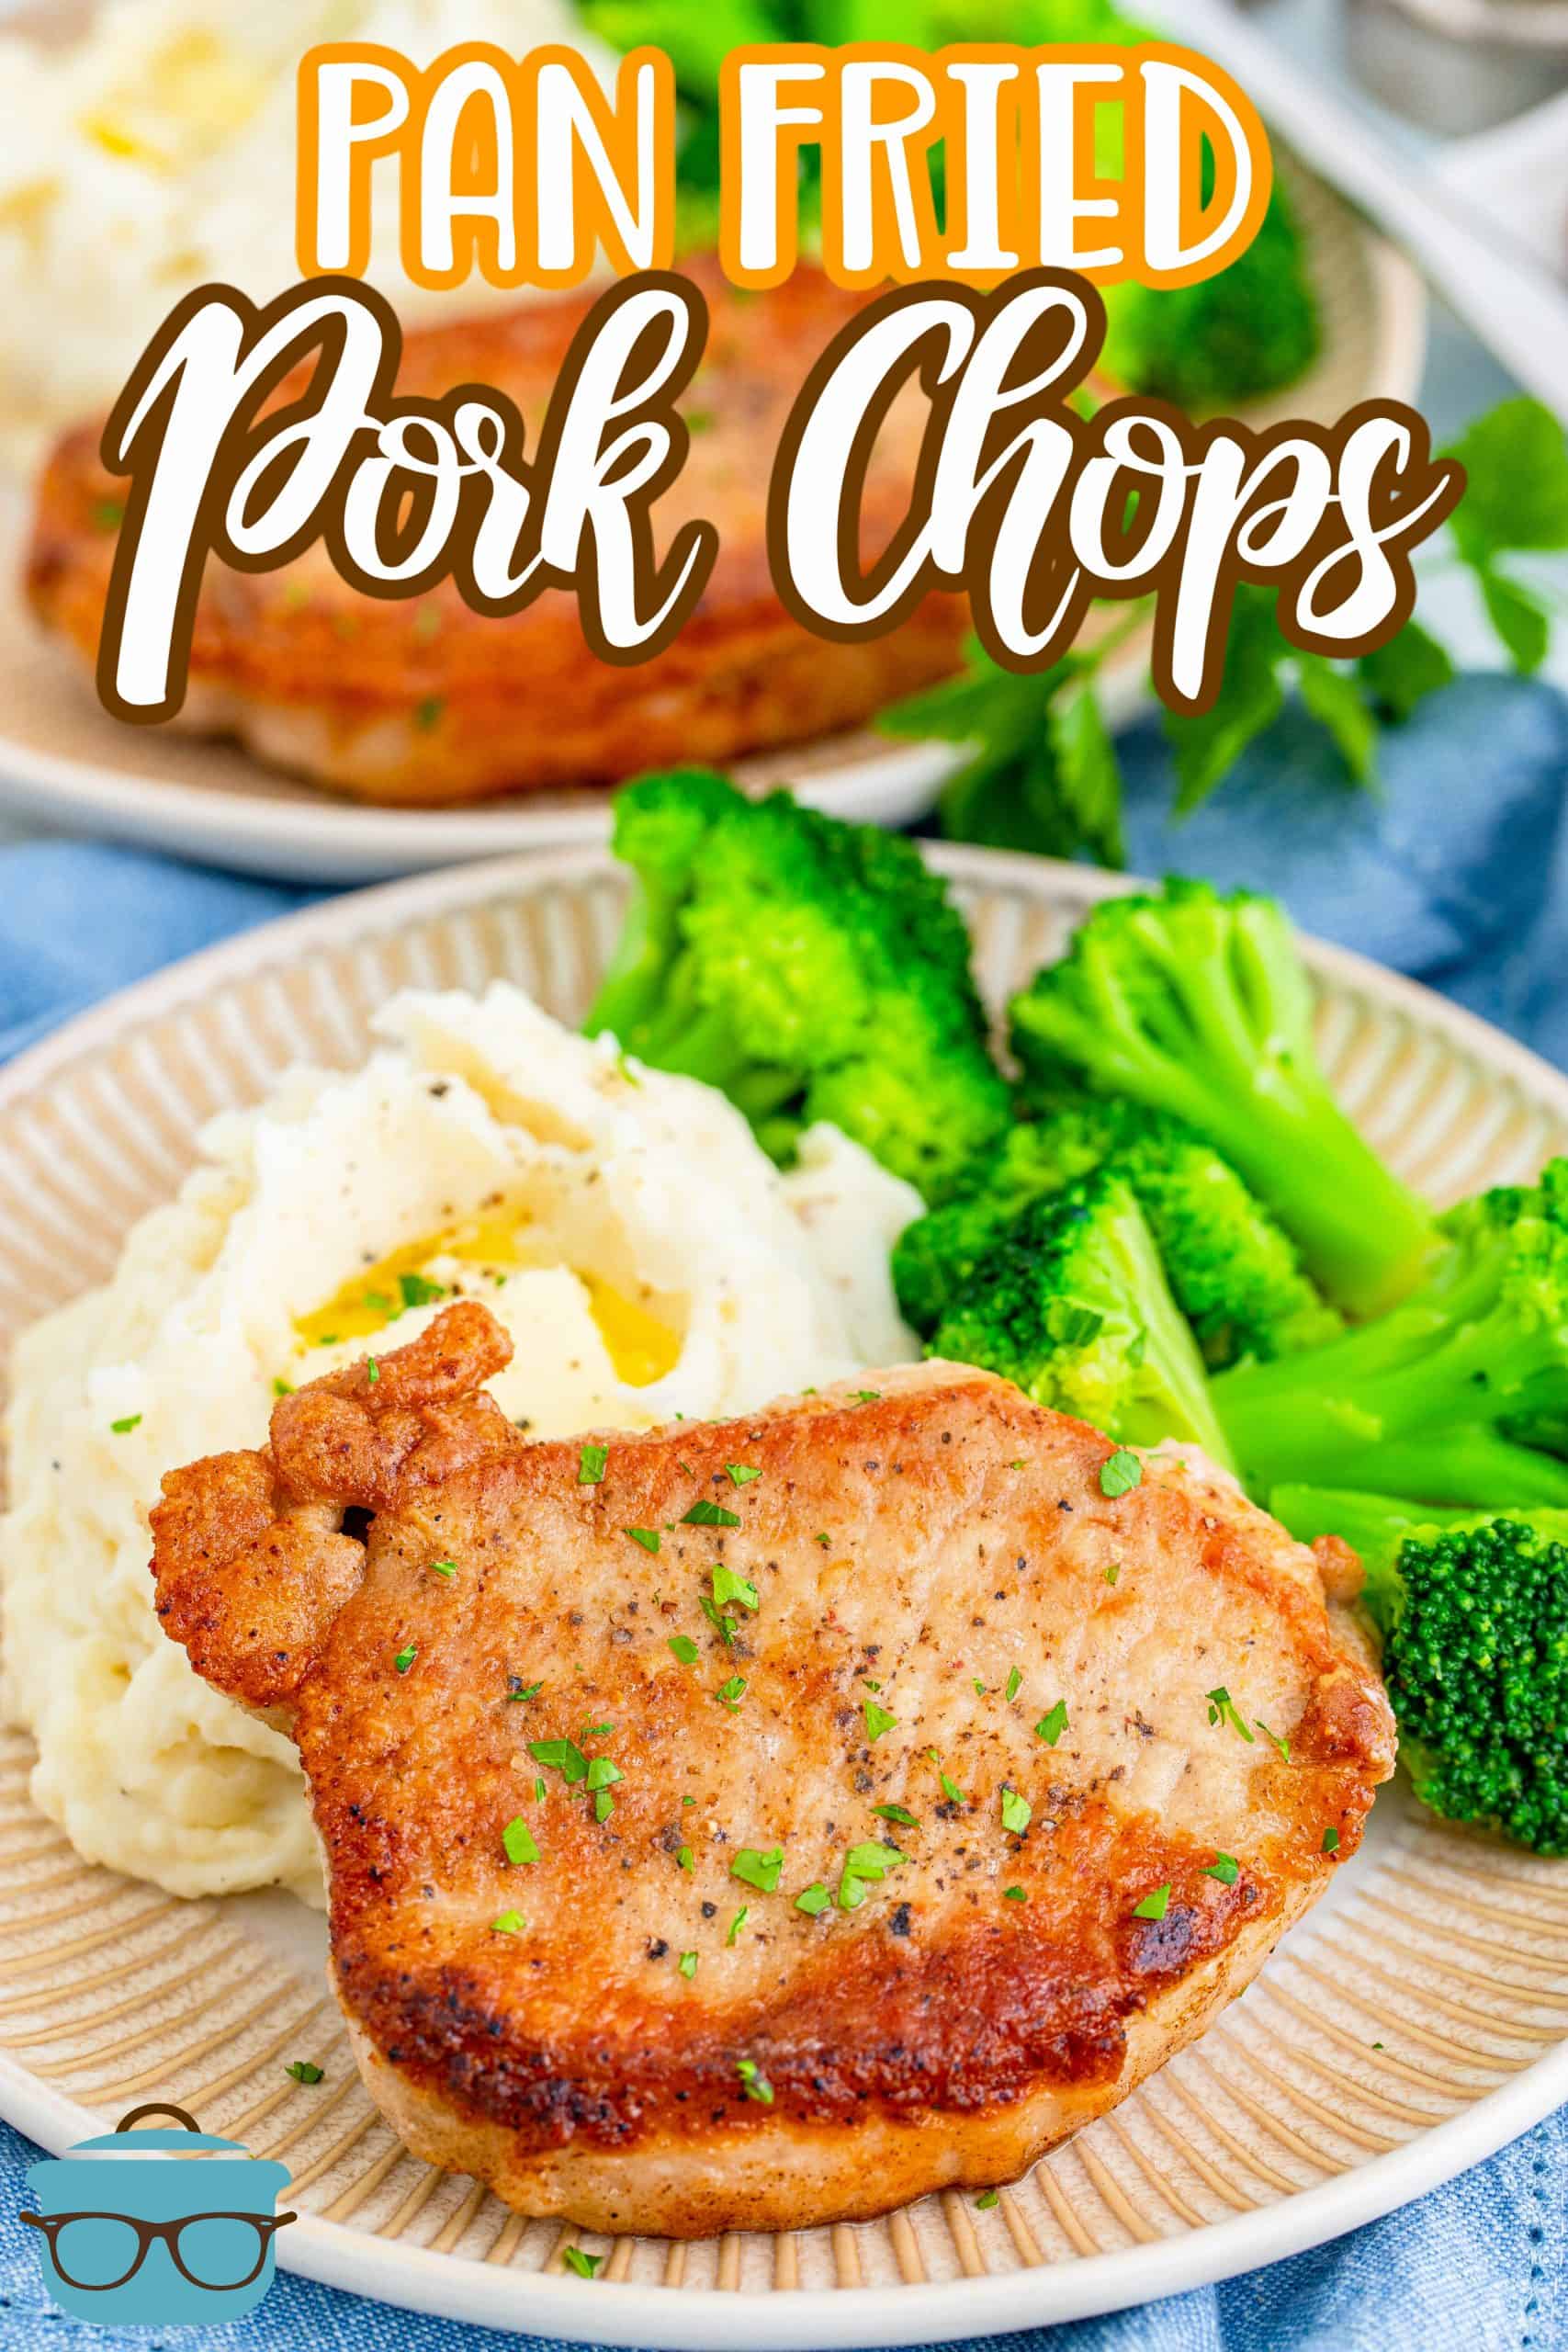 Easy Pan Fried Pork Chops recipe from The Country Cook, cooked pork chop shown on a tan colored plate with mashed potatoes and steamed broccoli.